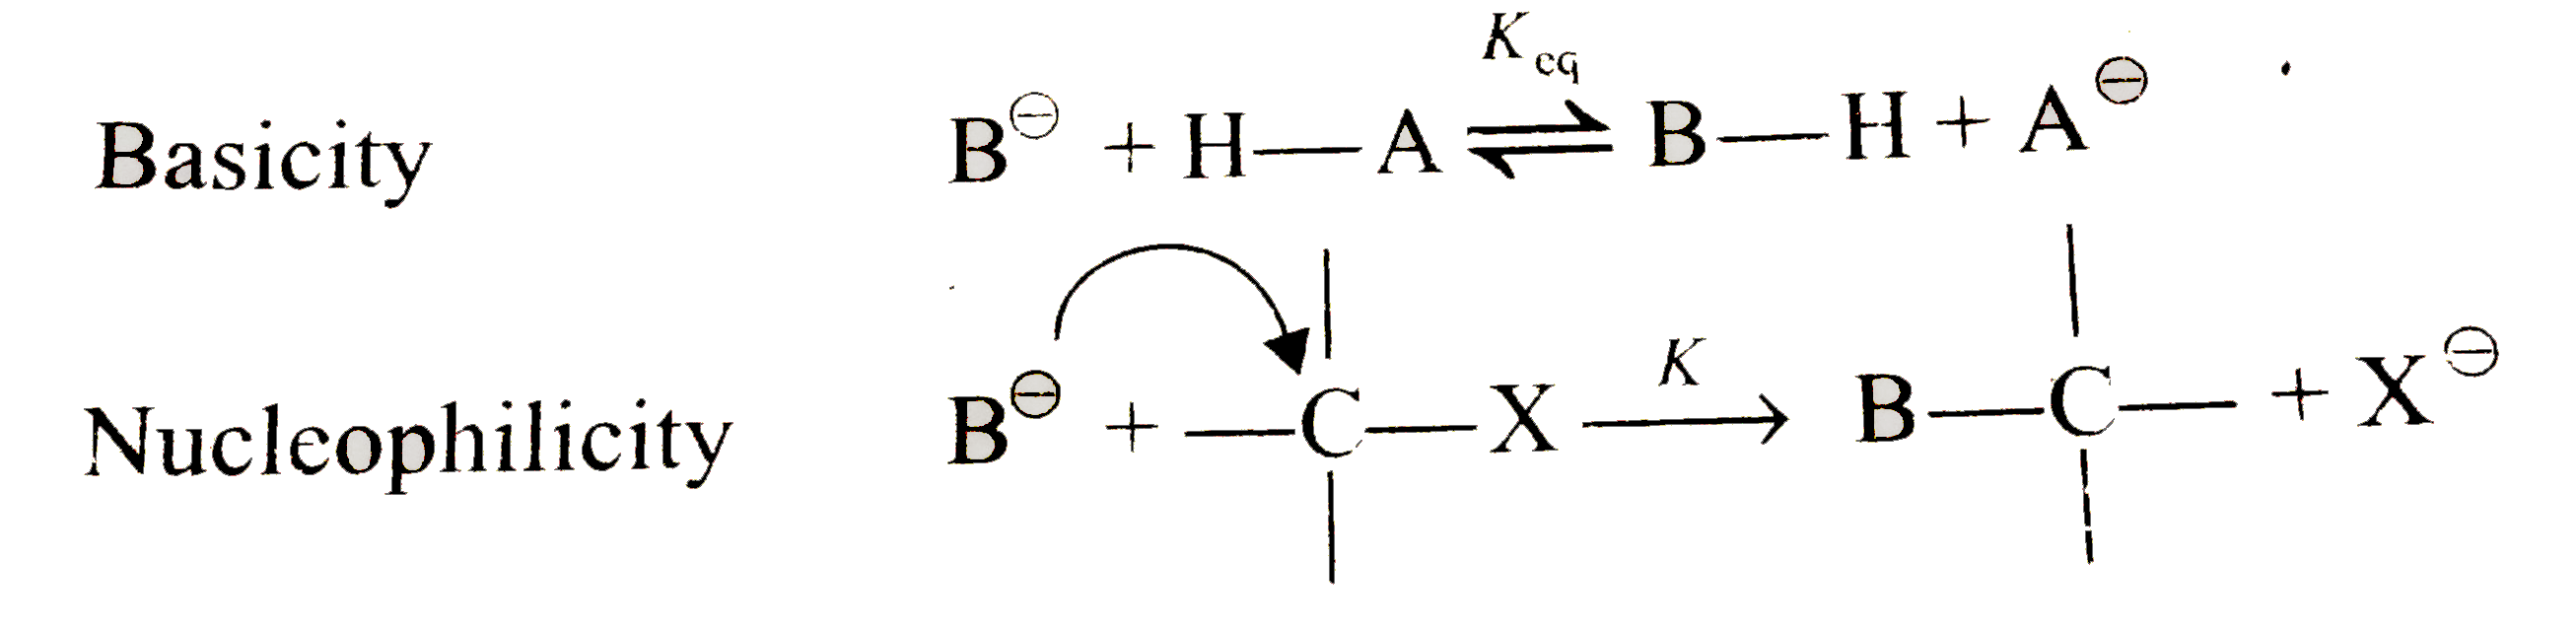 Basicity is defined by equilibrium constant for abstracting a proton. Nucleophilicity is defined by rate of attack on an electrophilic carbon atom,      A species with a negative charge is stronger nucleophile than similar neutral species.Nucleophilicity decreases form left to right in periodic table and increases down the group in periodic table. As the size of similar type of negatively charged species increases, basicity increases and nuleophilicity decreases.   Among the given pairs, in which first has lower nucleophilic character?